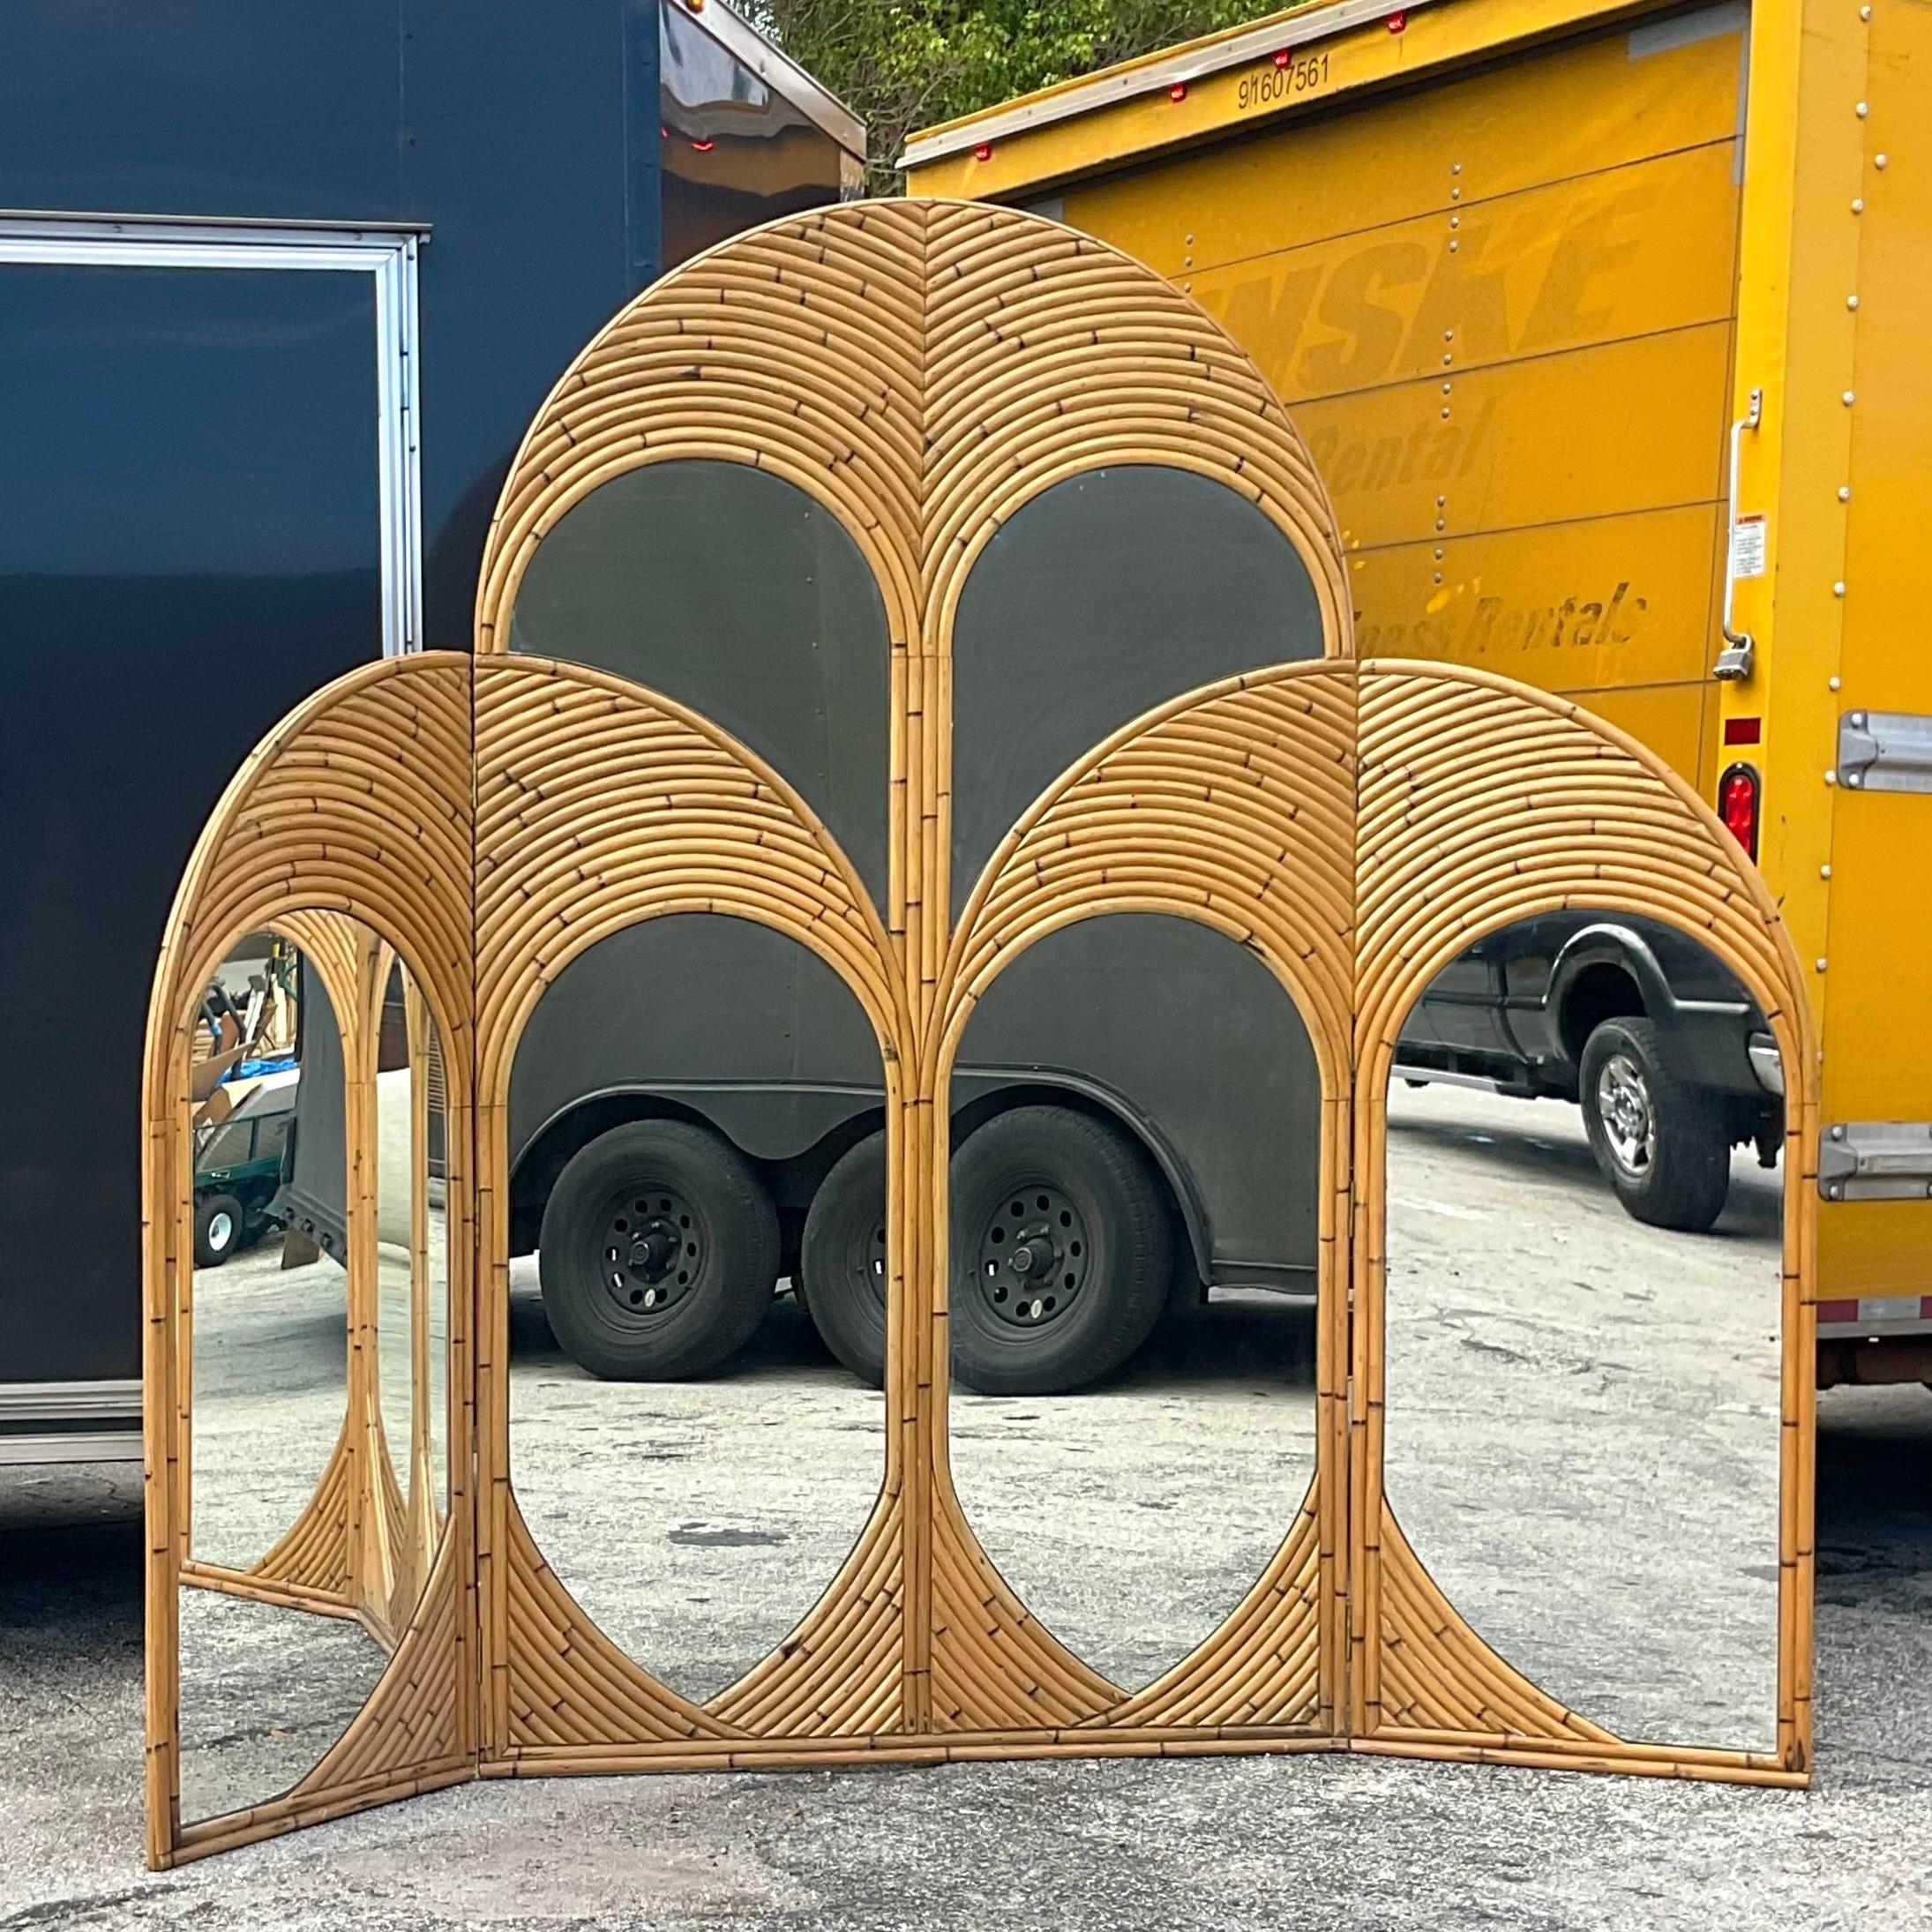 An exceptional vintage Coastal monumental screen. A chic arched bent rattan with inset mirrored panels. Perfect as a screen or also would be an amazing headboard. You decide. Acquired from a Palm Beach estate.